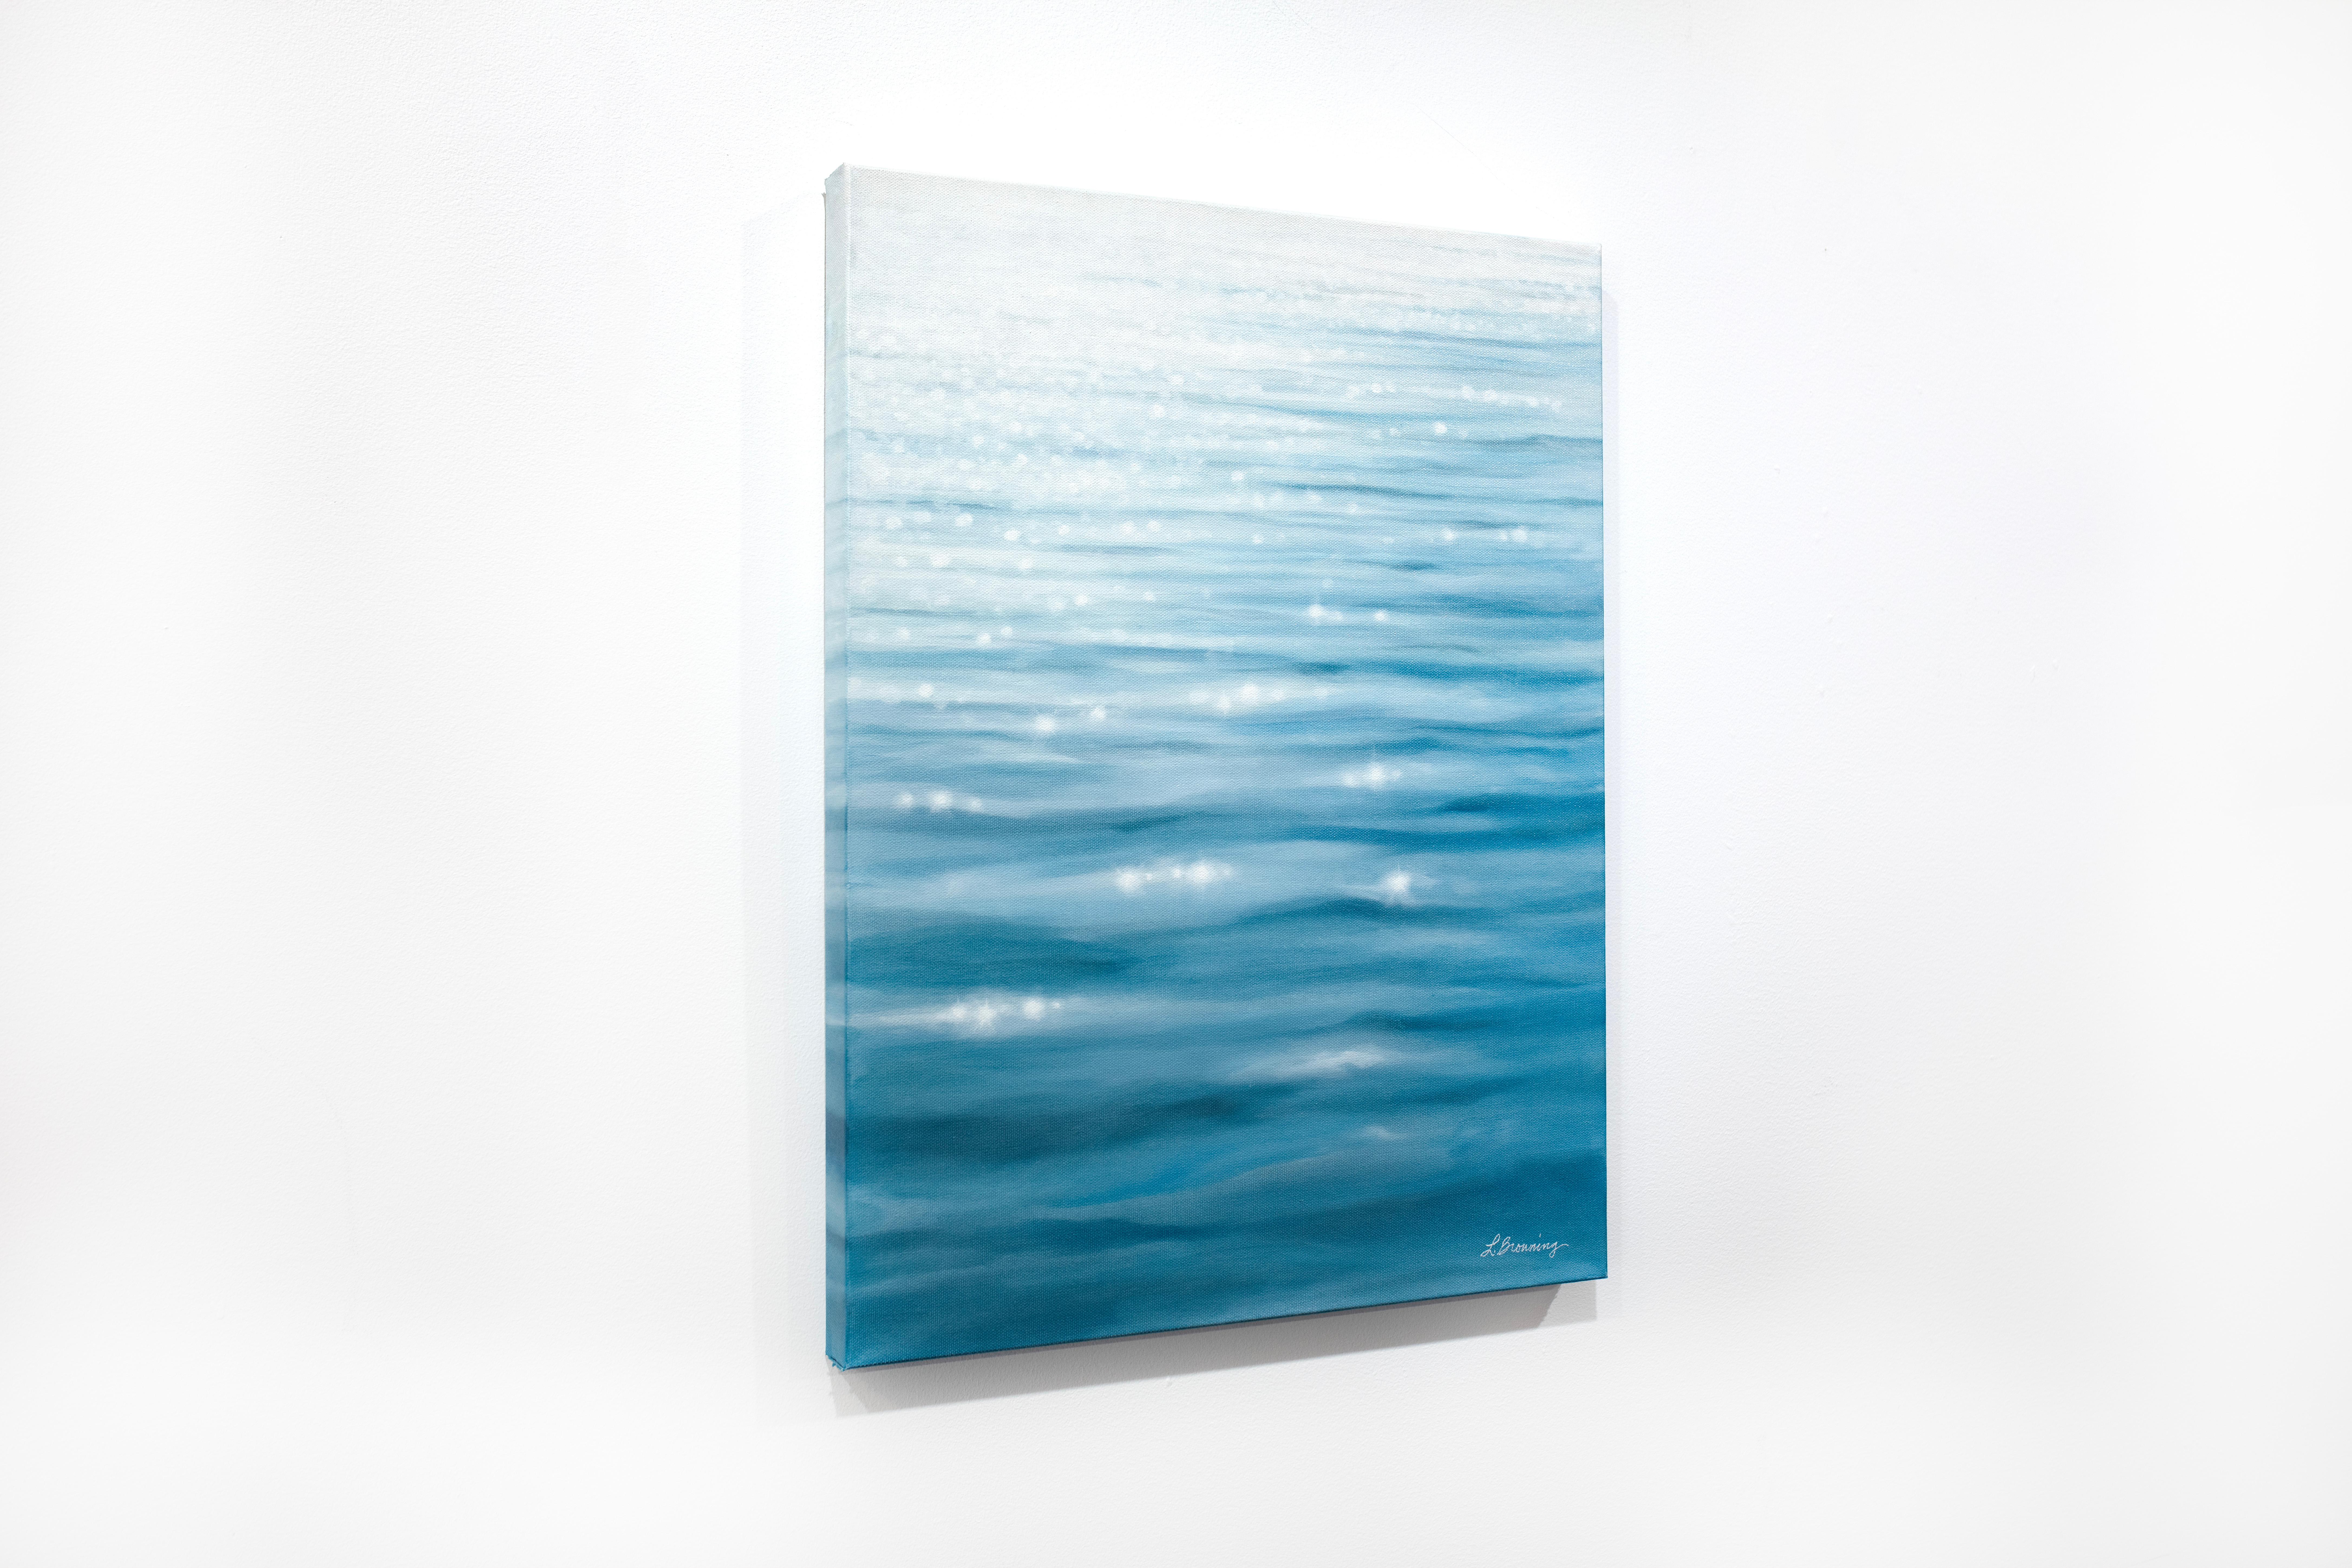 This representational blue coastal oil painting by artist Laura Browning features a close-up cropped view of the surface of open water, with light glistening across it. It is made on gallery wrapped canvas with the painting continuing over the